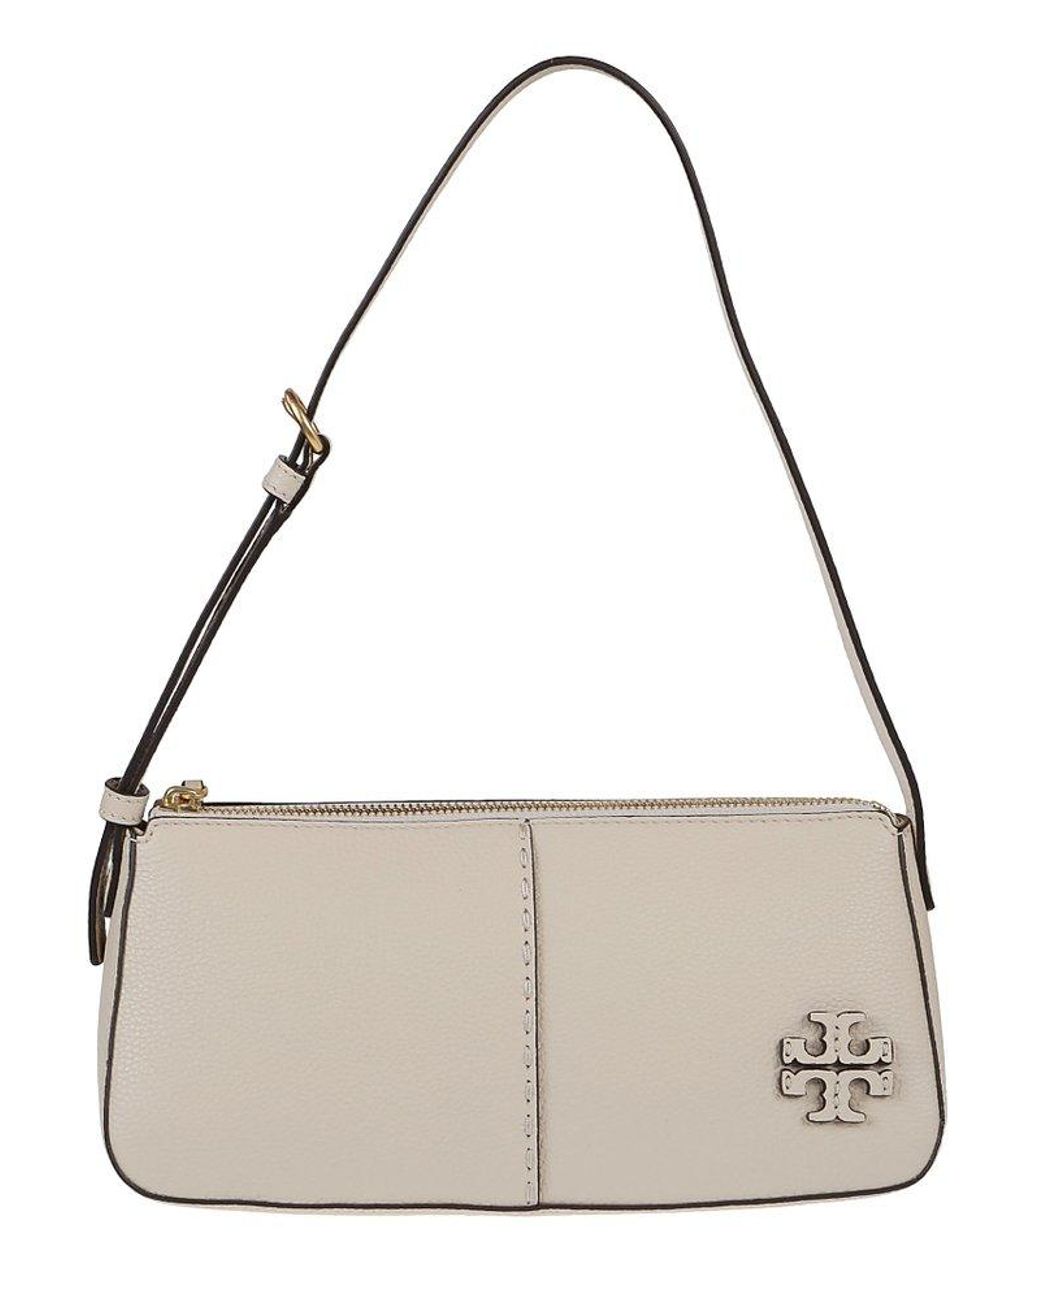 Tory Burch Mcgraw Wedge Zipped Shoulder Bag in White | Lyst Canada